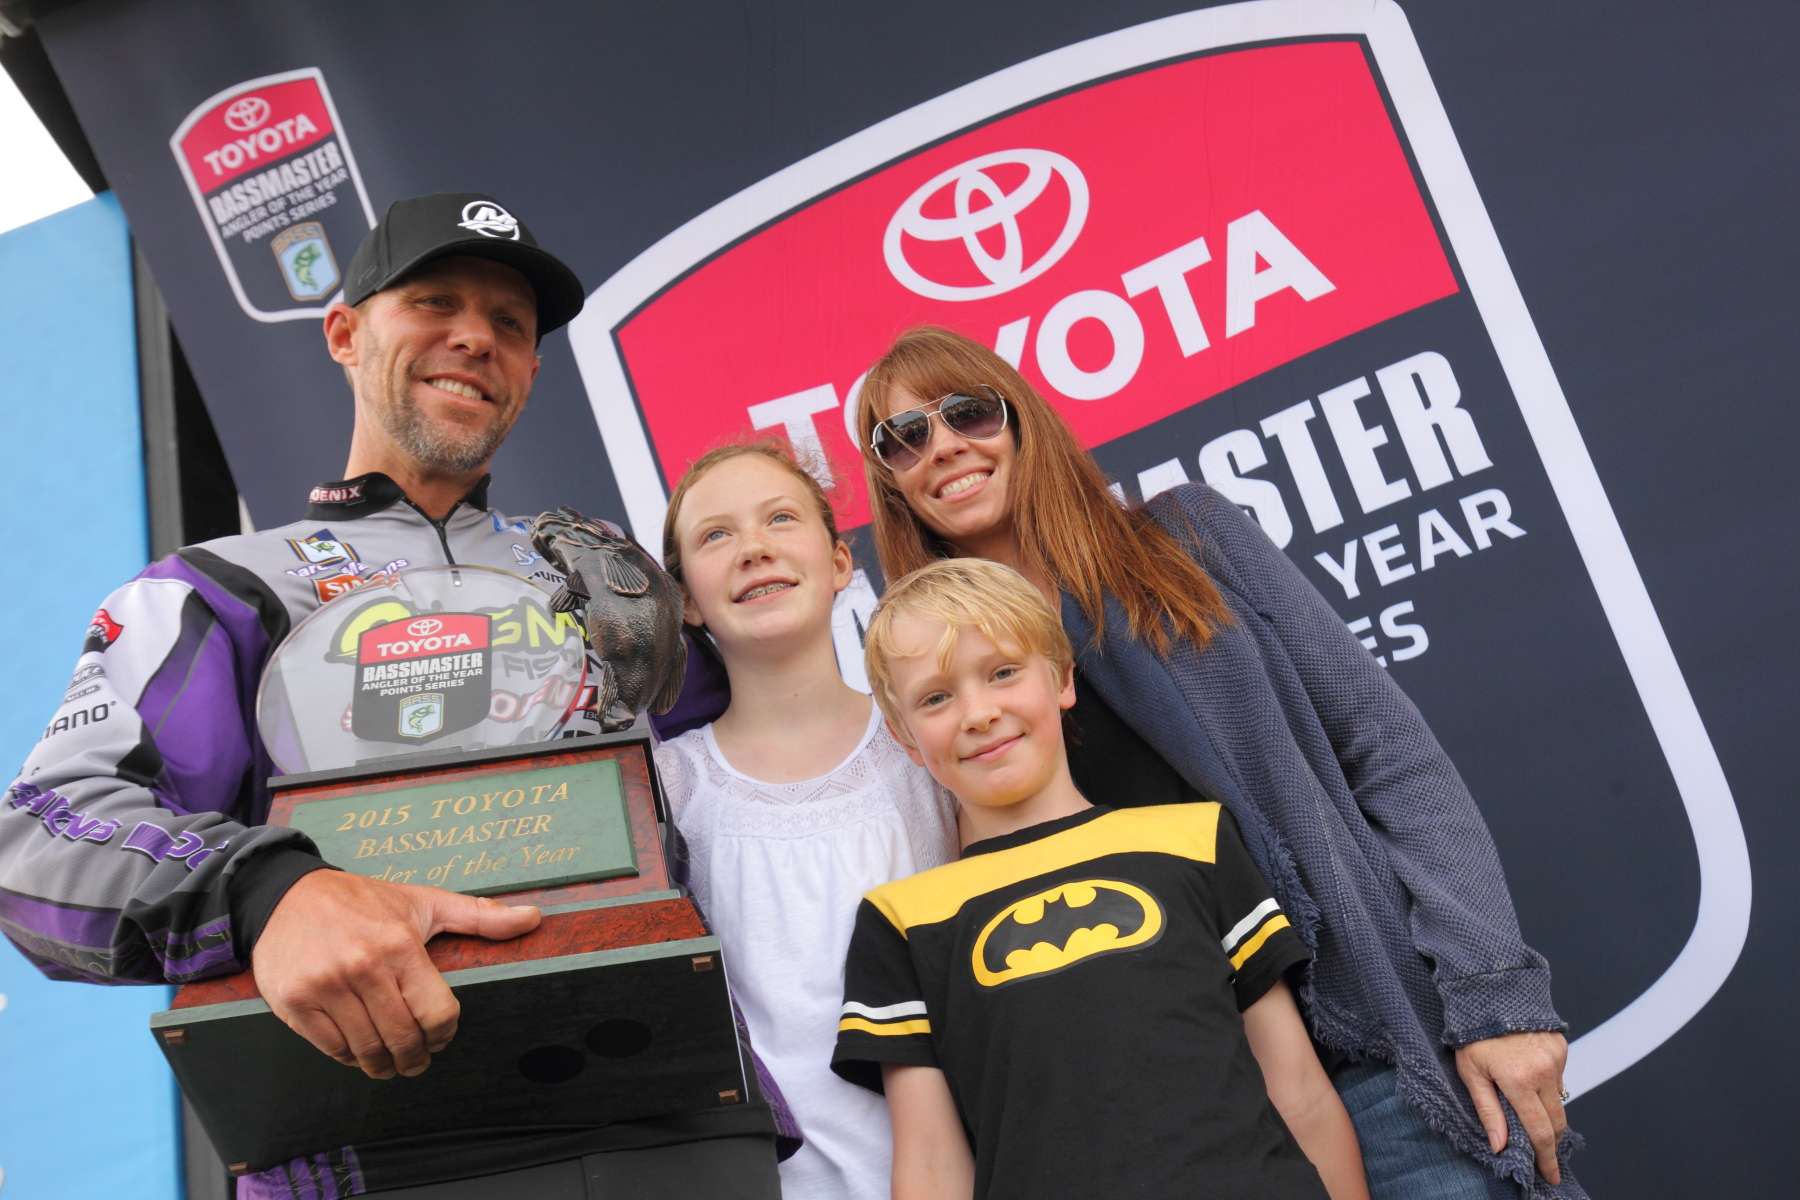 He did nail the postseason awards by picking Aaron Martens as Toyota Bassmaster Angler of the Year and Brent Ehrler as Rookie of the Year. Letâs look at who heâs picking to win in the 2016 season, which gets under way this week.